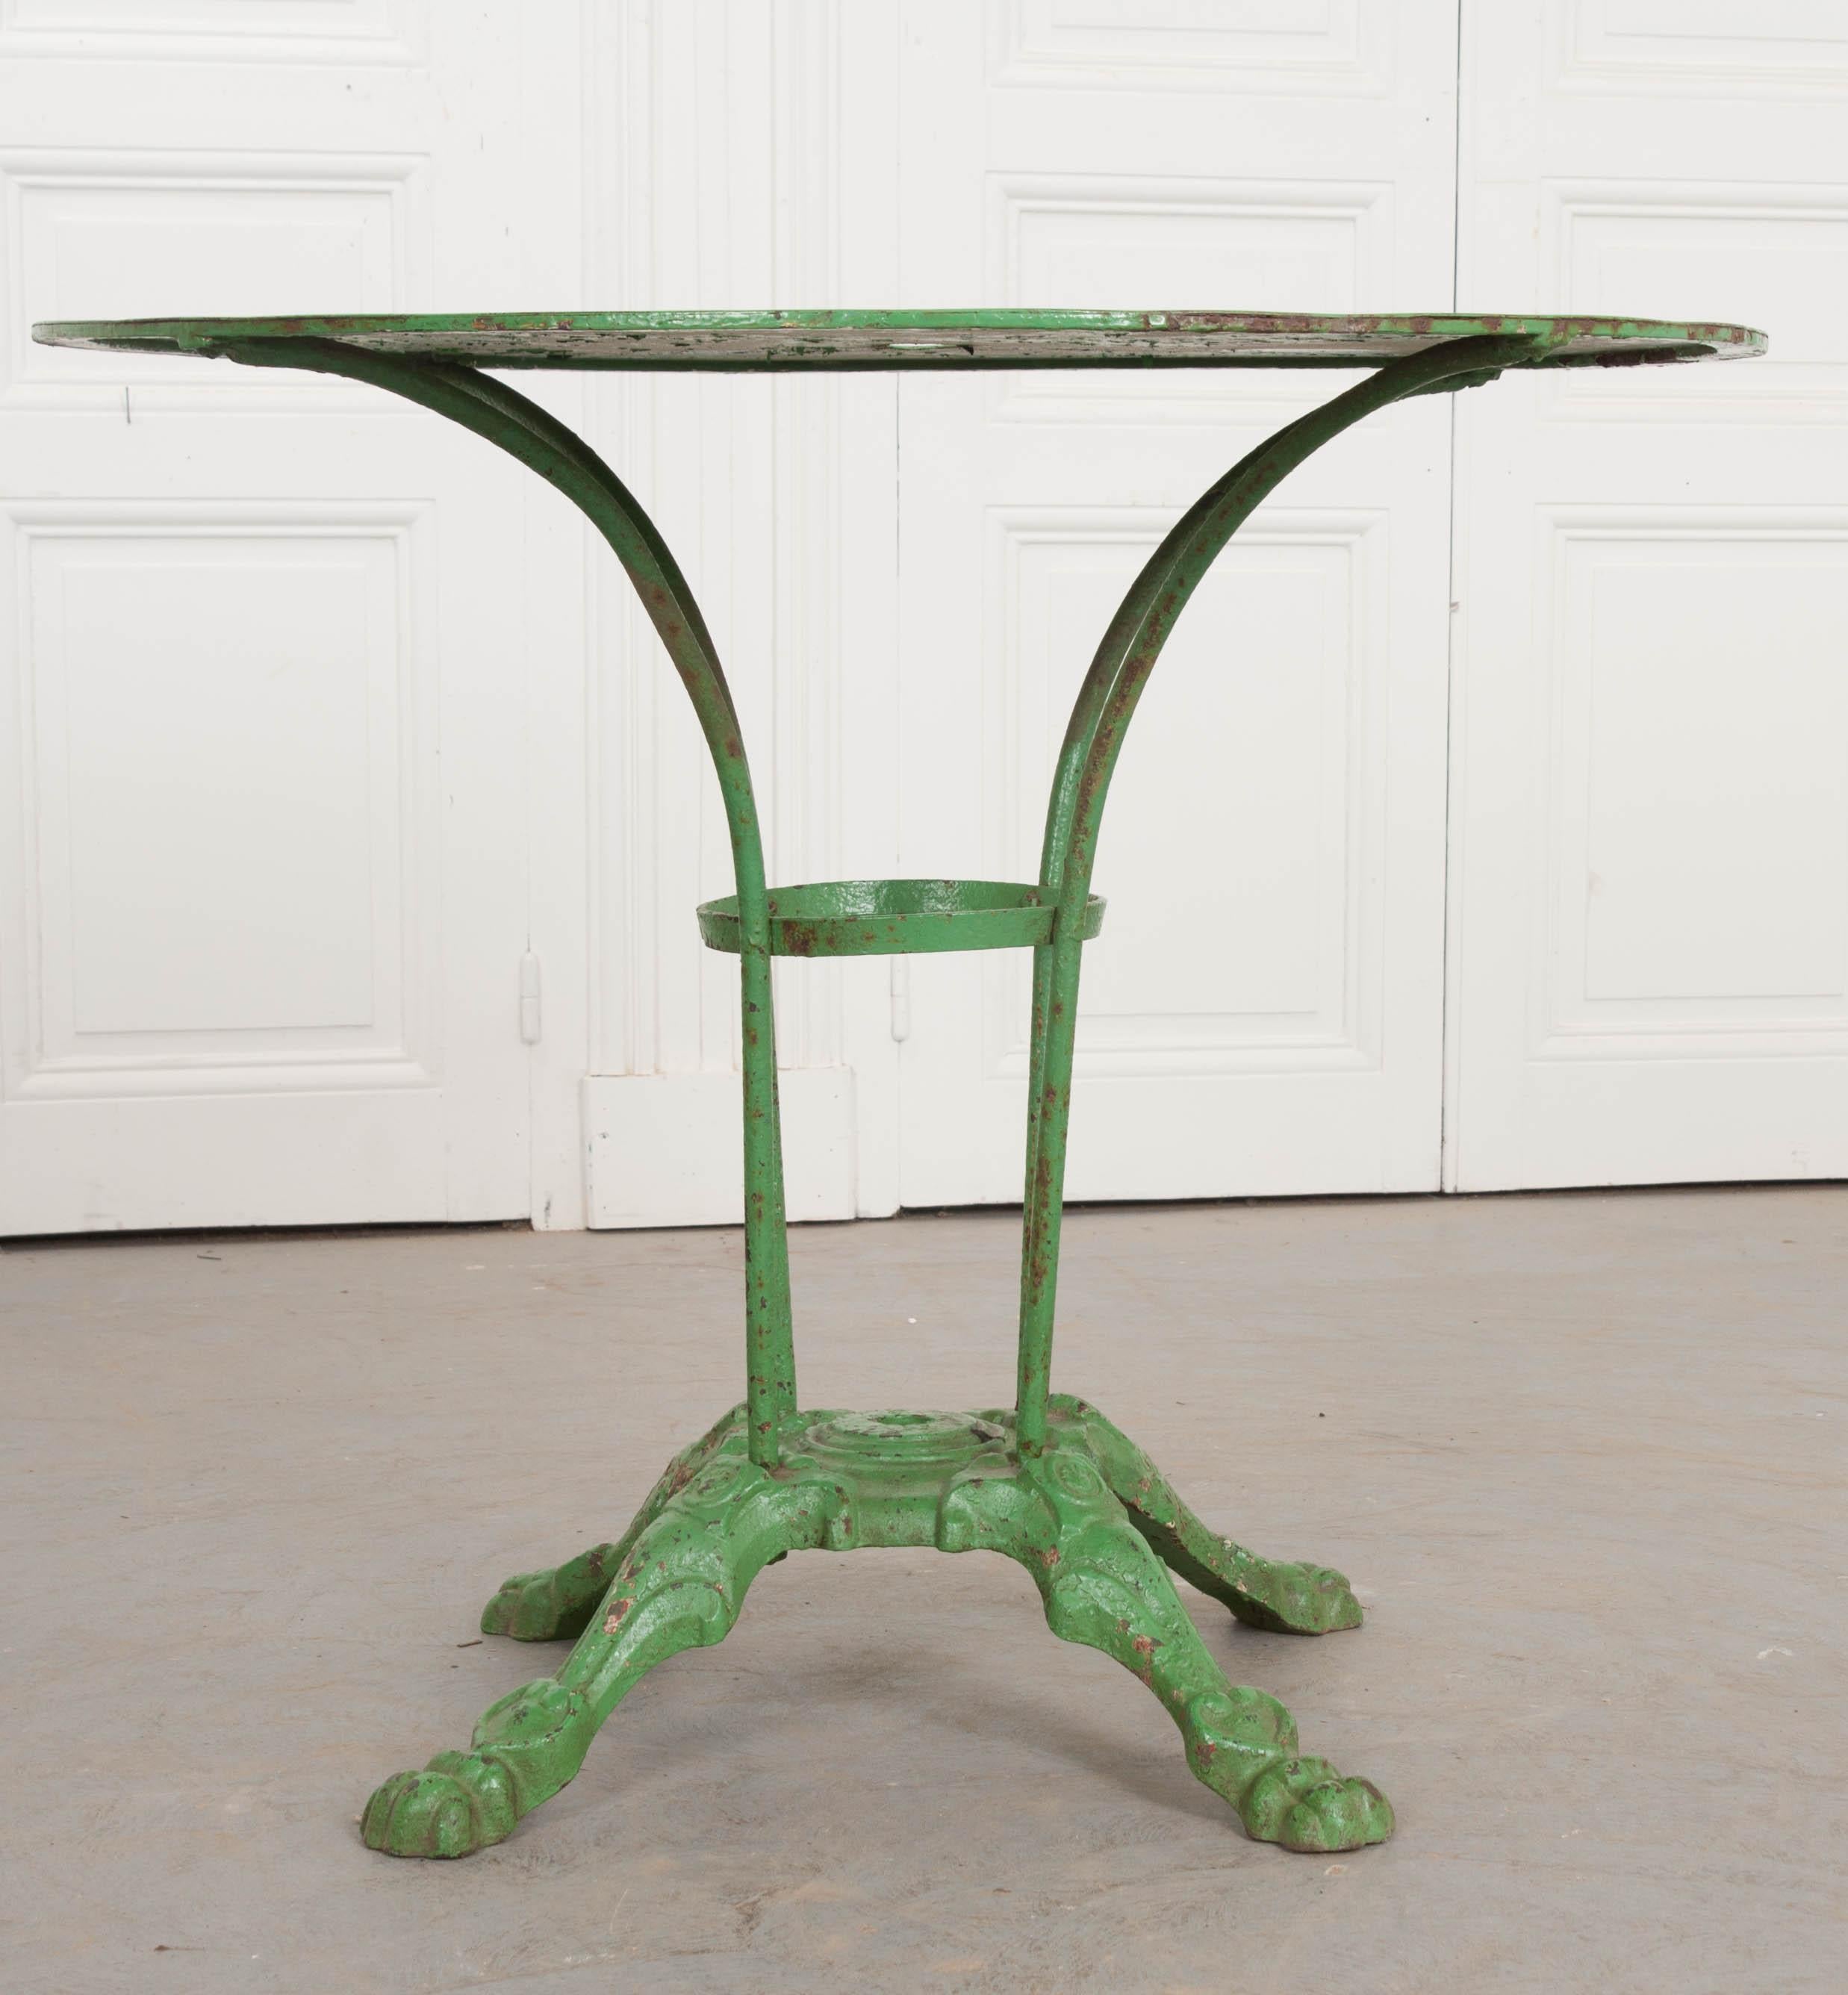 A 1900s iron and metal garden table, painted green, from France. The table has a classically styled cast iron base, with four paw feet and space for an umbrella. The metal top is in wonderful antique condition, with the antique green paint becoming